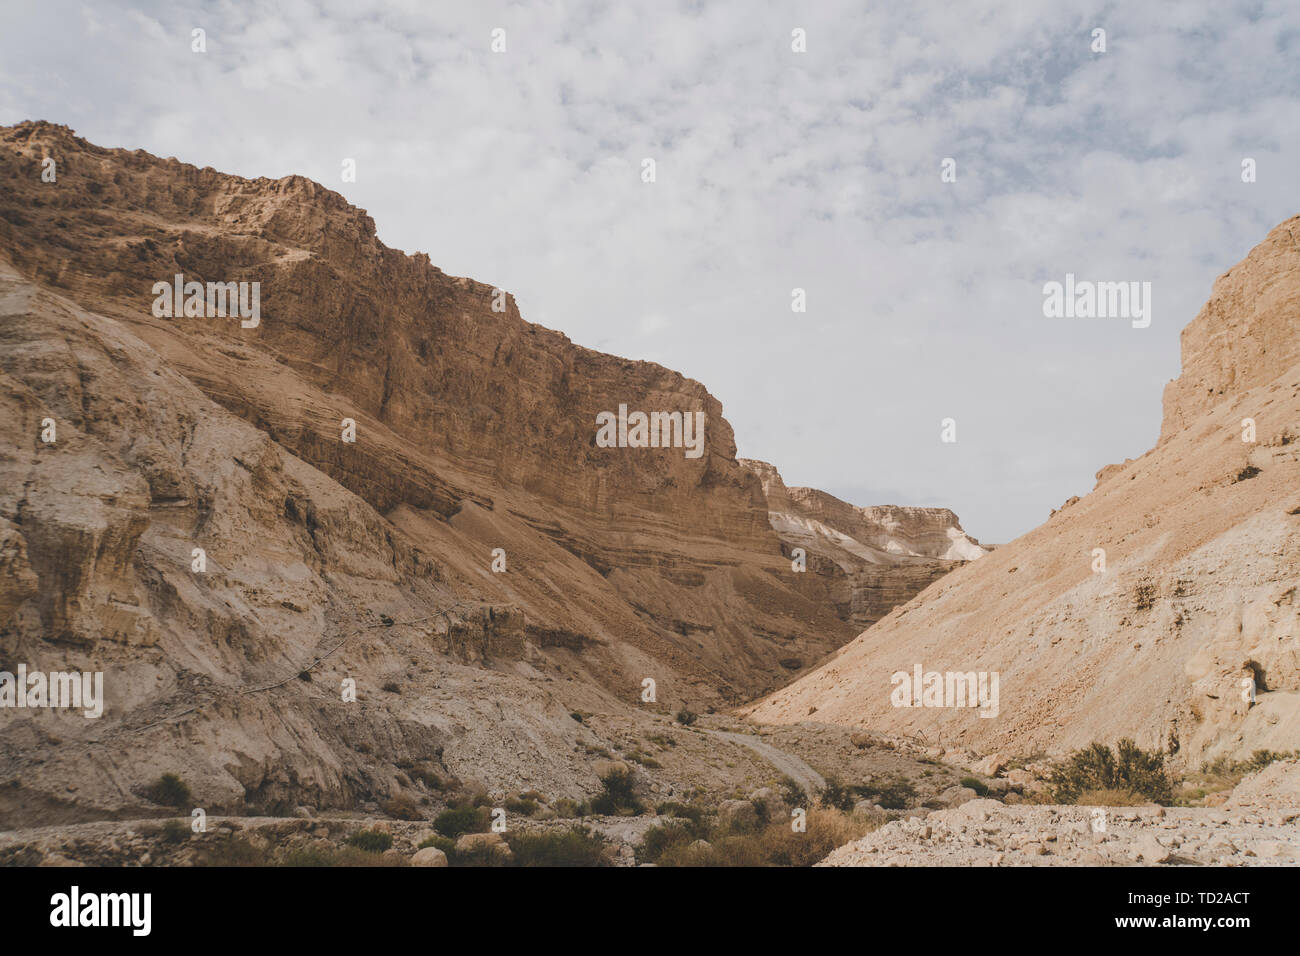 Beautiful landscape view of the Canyon in Israel taken during a fine day. Mountains, hills and cliffs against the cloudy sky in the Judean desert Stock Photo